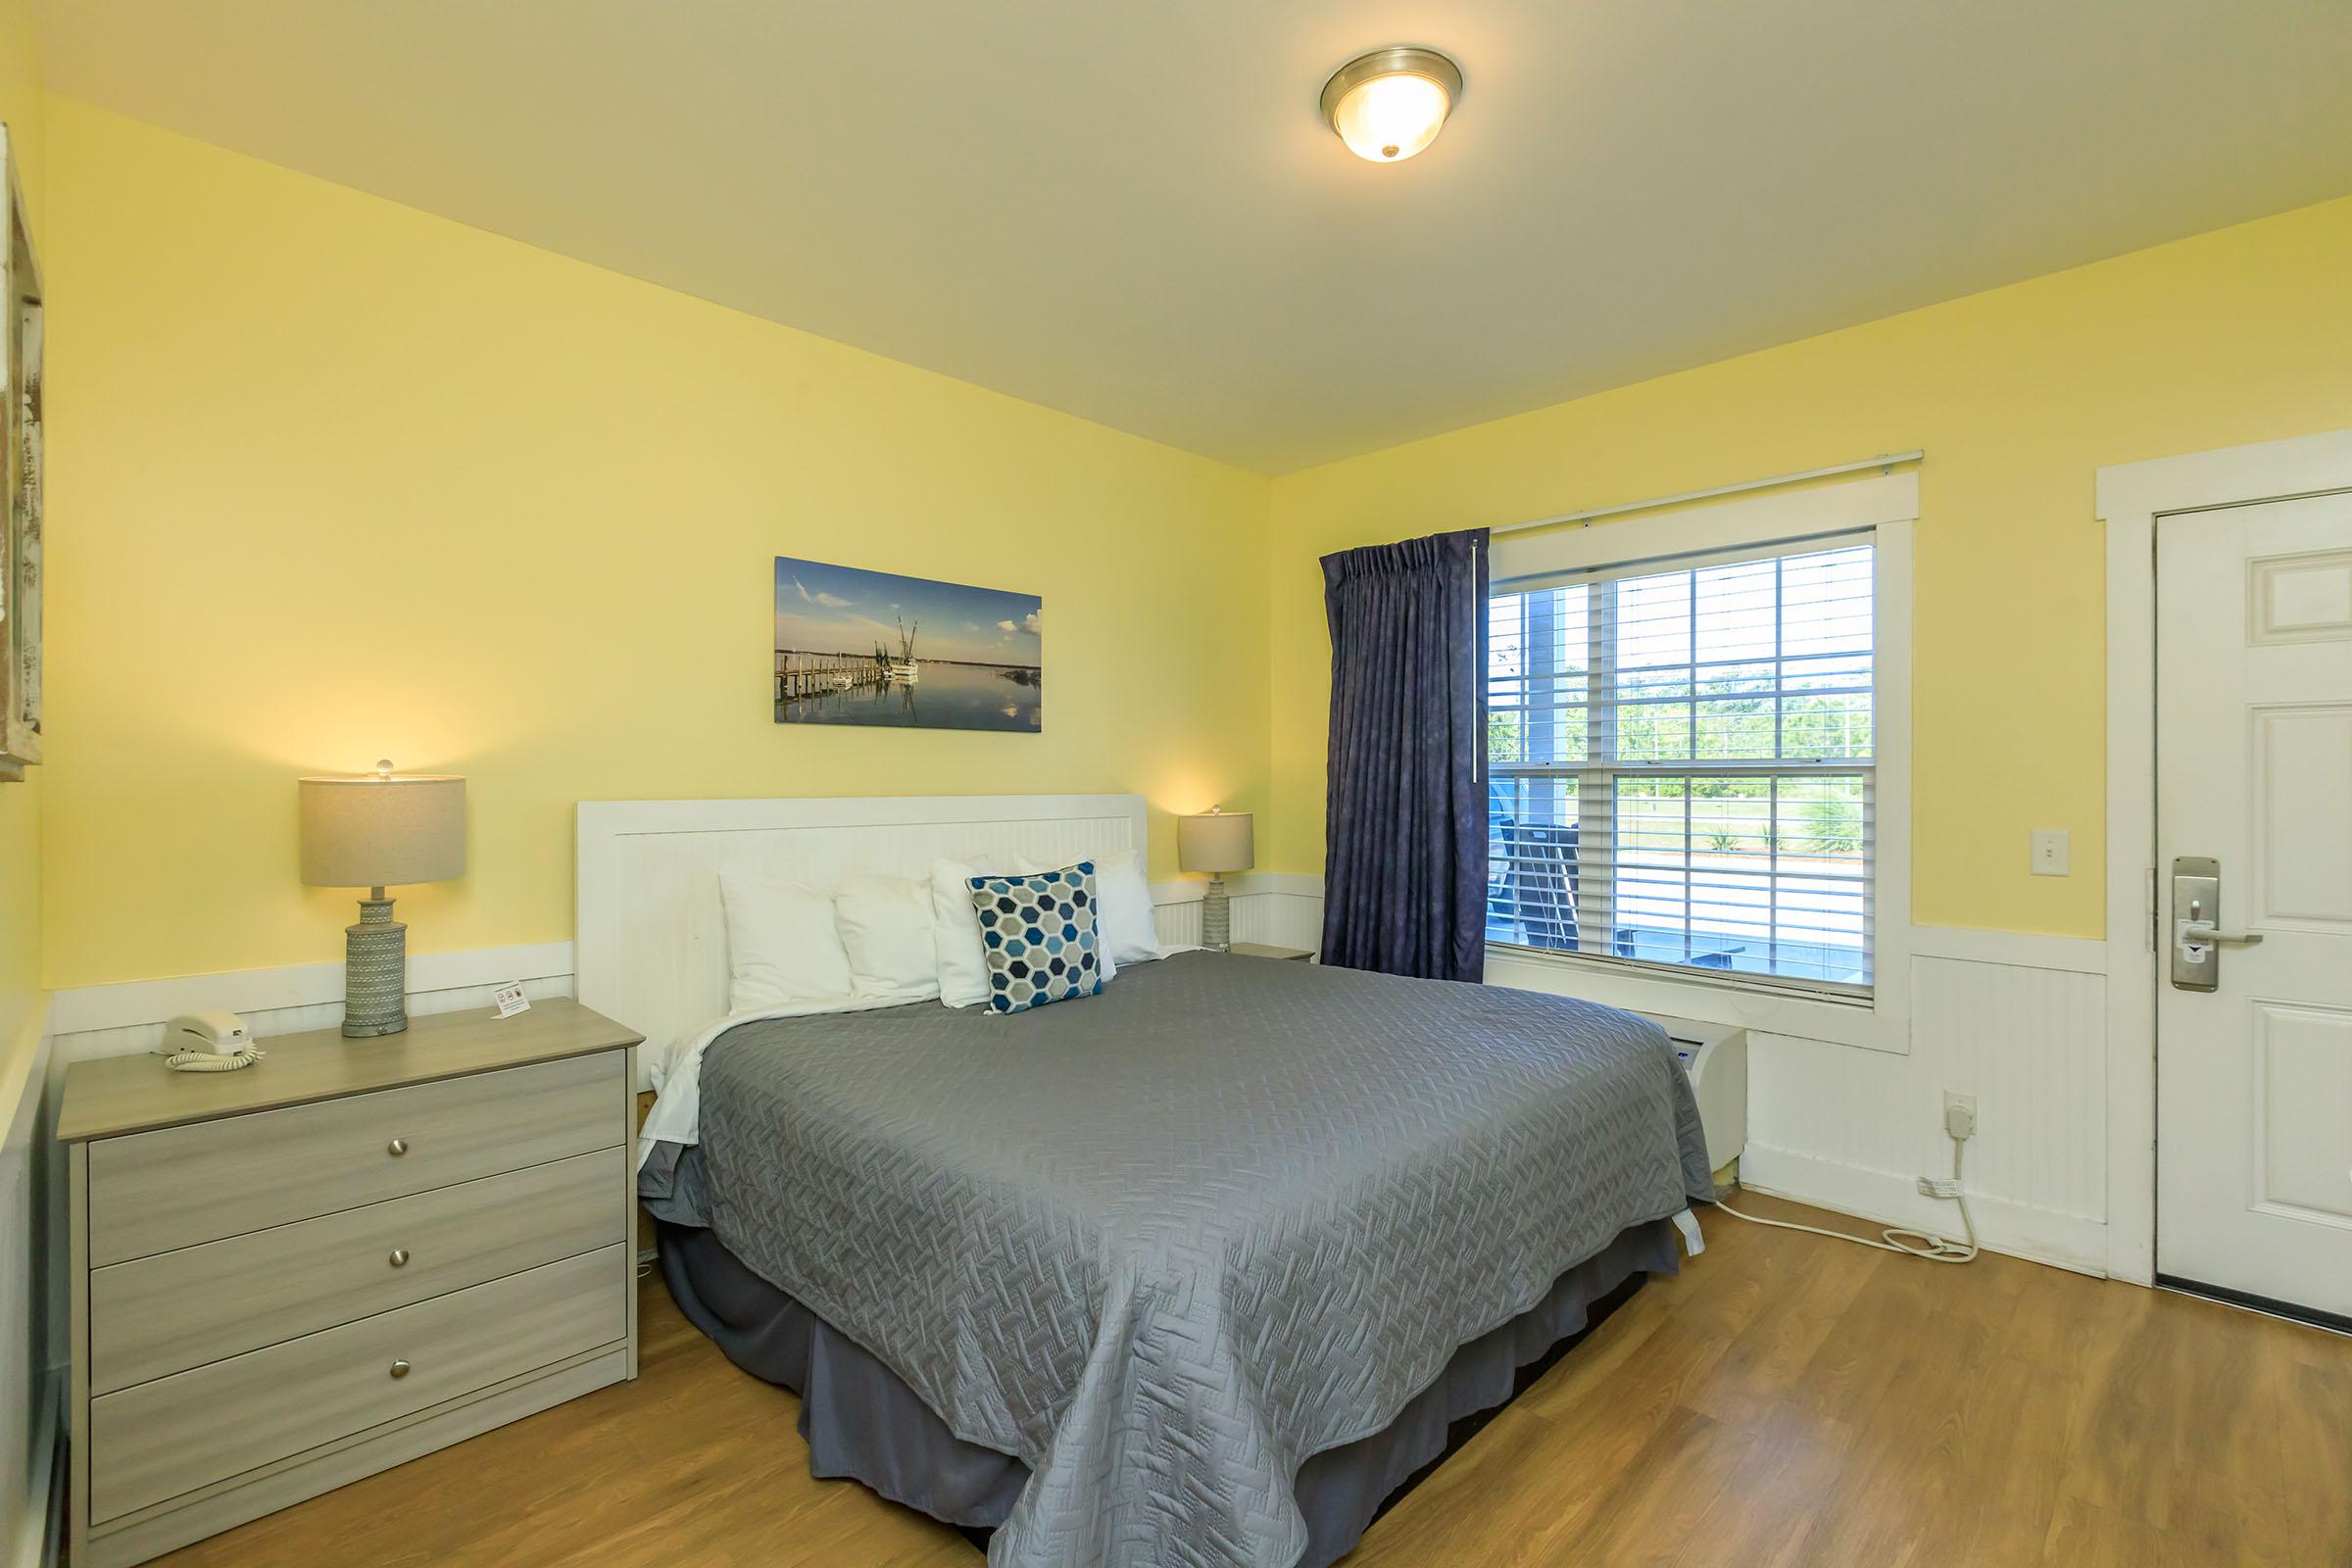 WELCOME HOME TO TOPSAIL SHORES INN